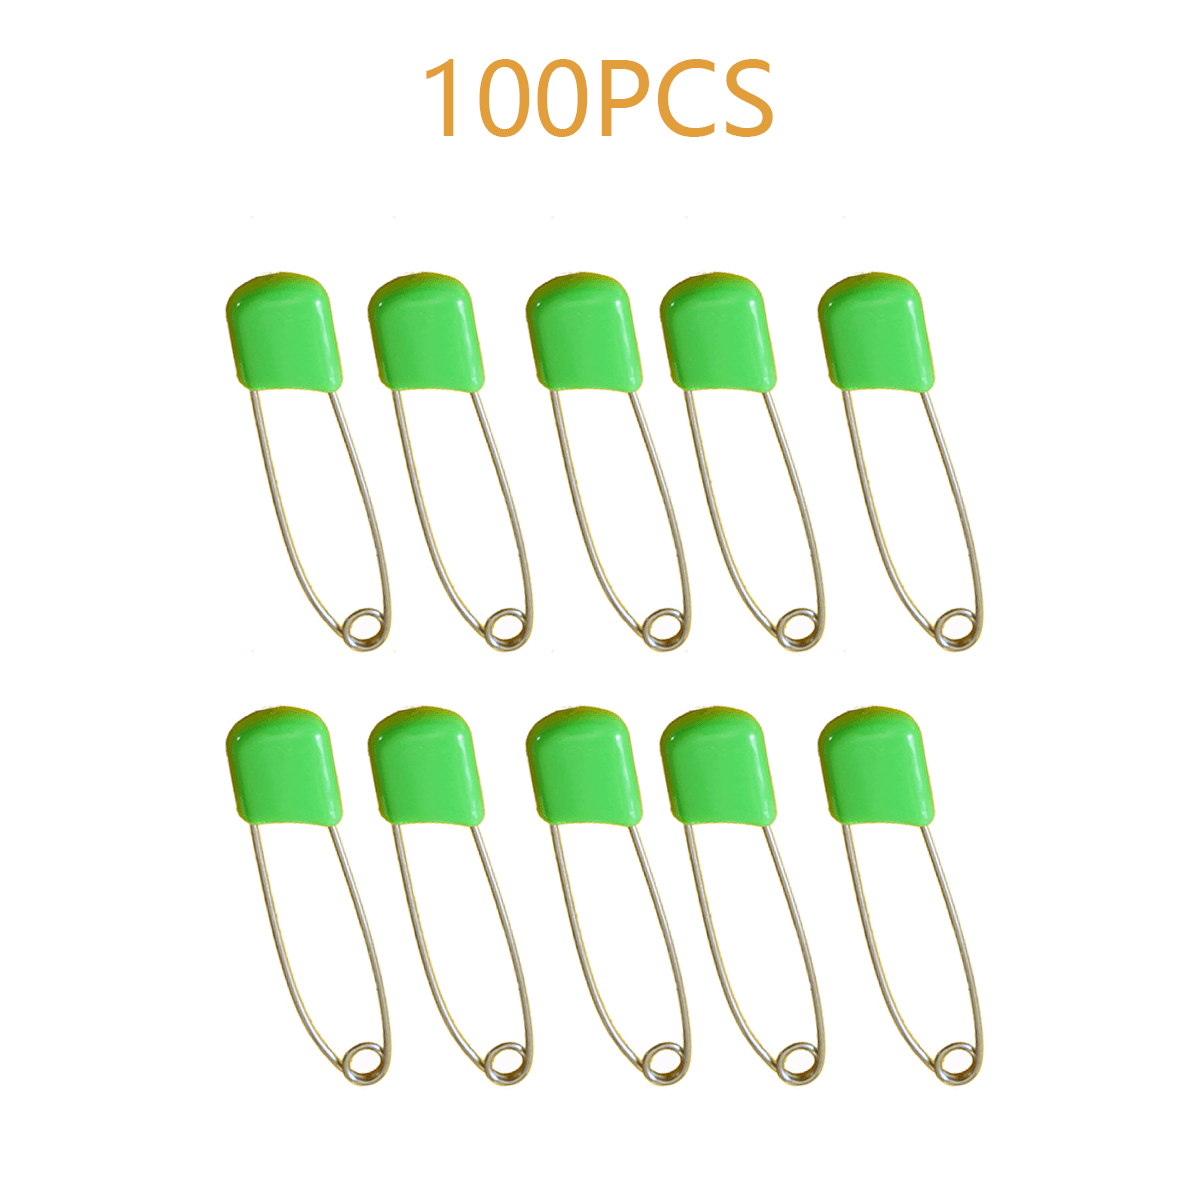 100pcs Large Nappy Diaper Pins Nappies Safety Pin Baby Diaper Change  Fasteners